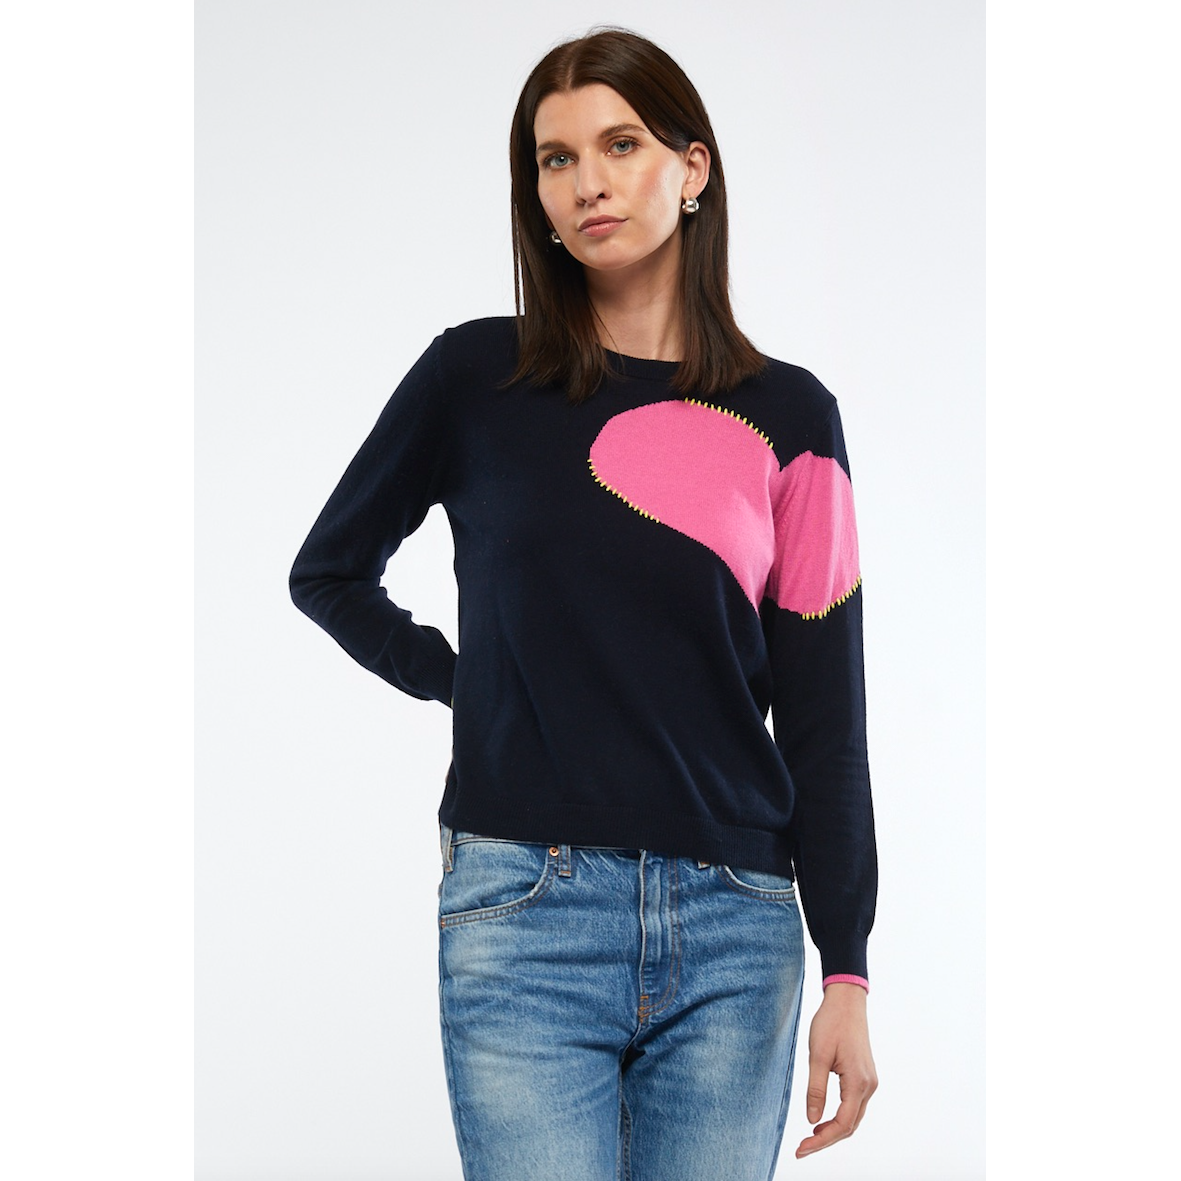 Z & P HEARTS PATCH JUMPER